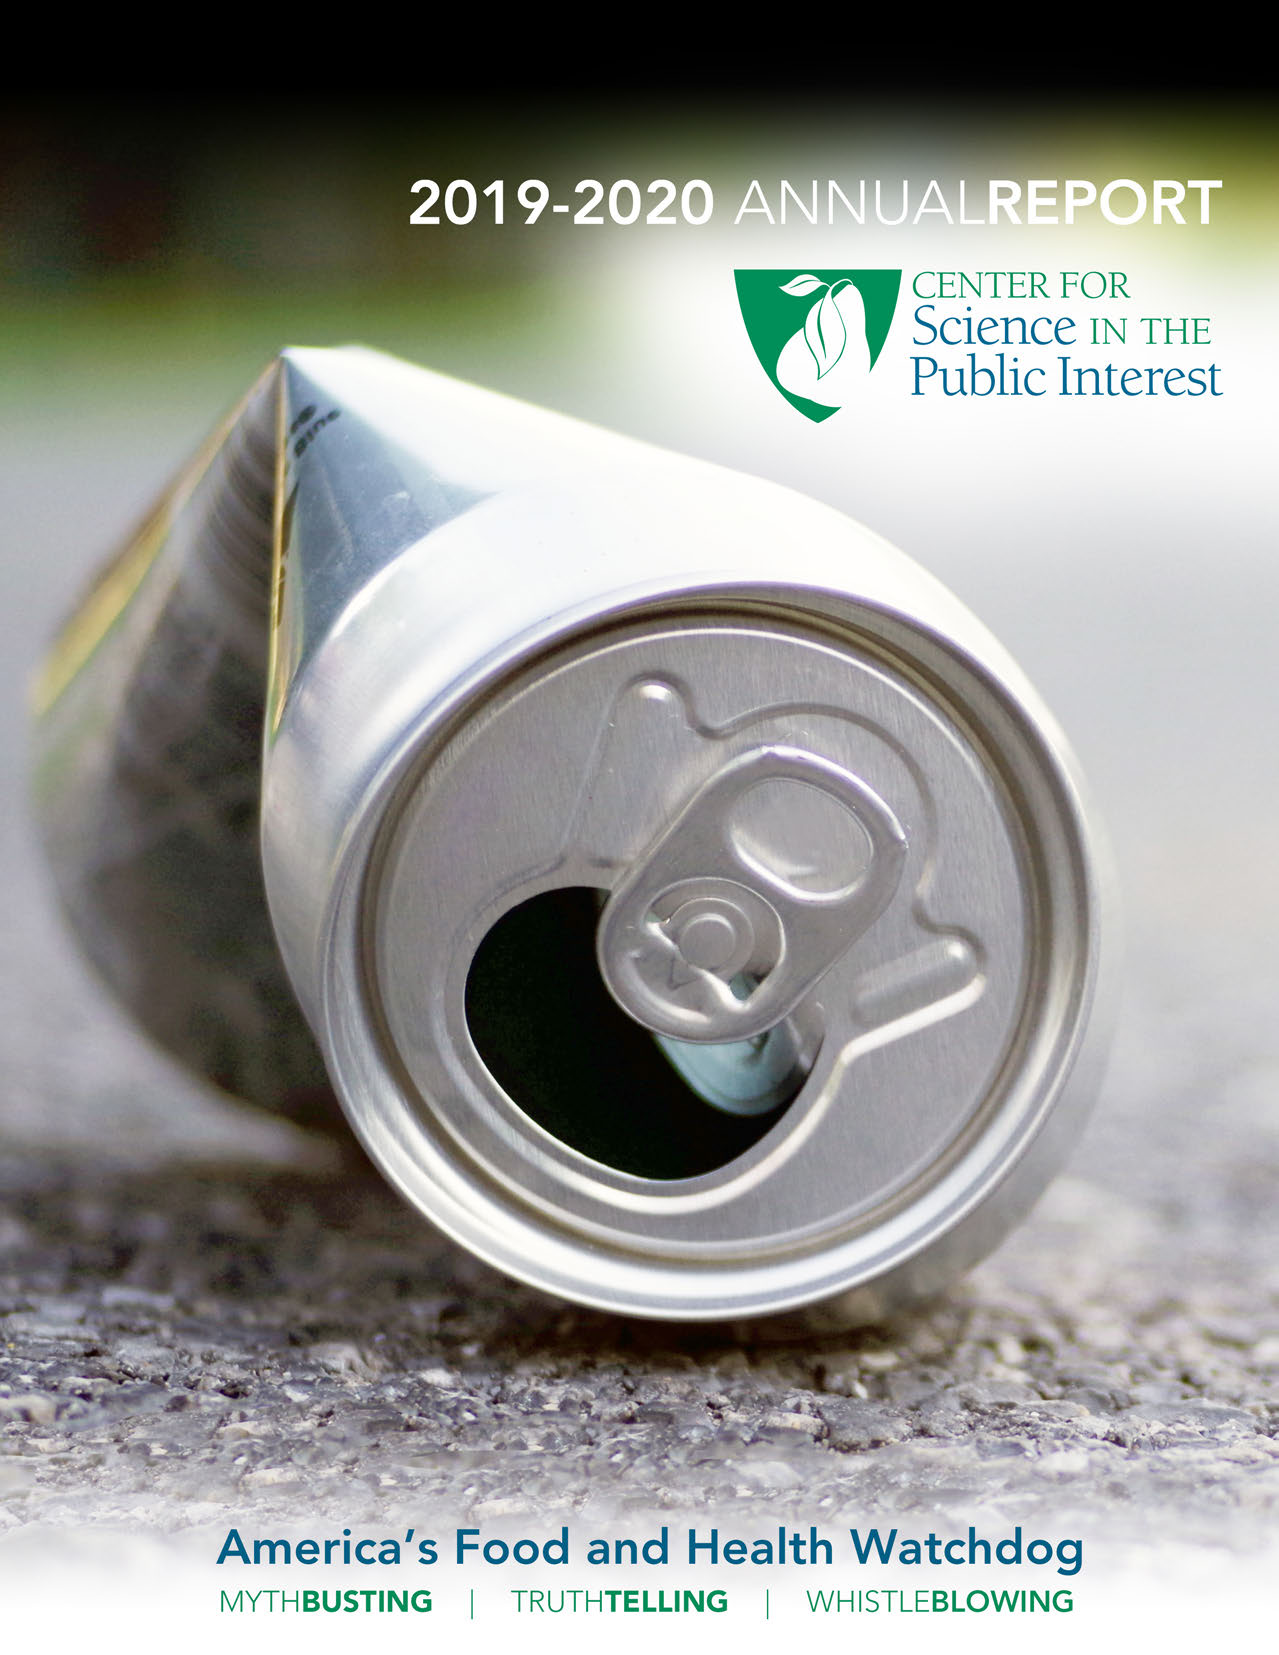 The cover of CSPI's 2019 Annual Report